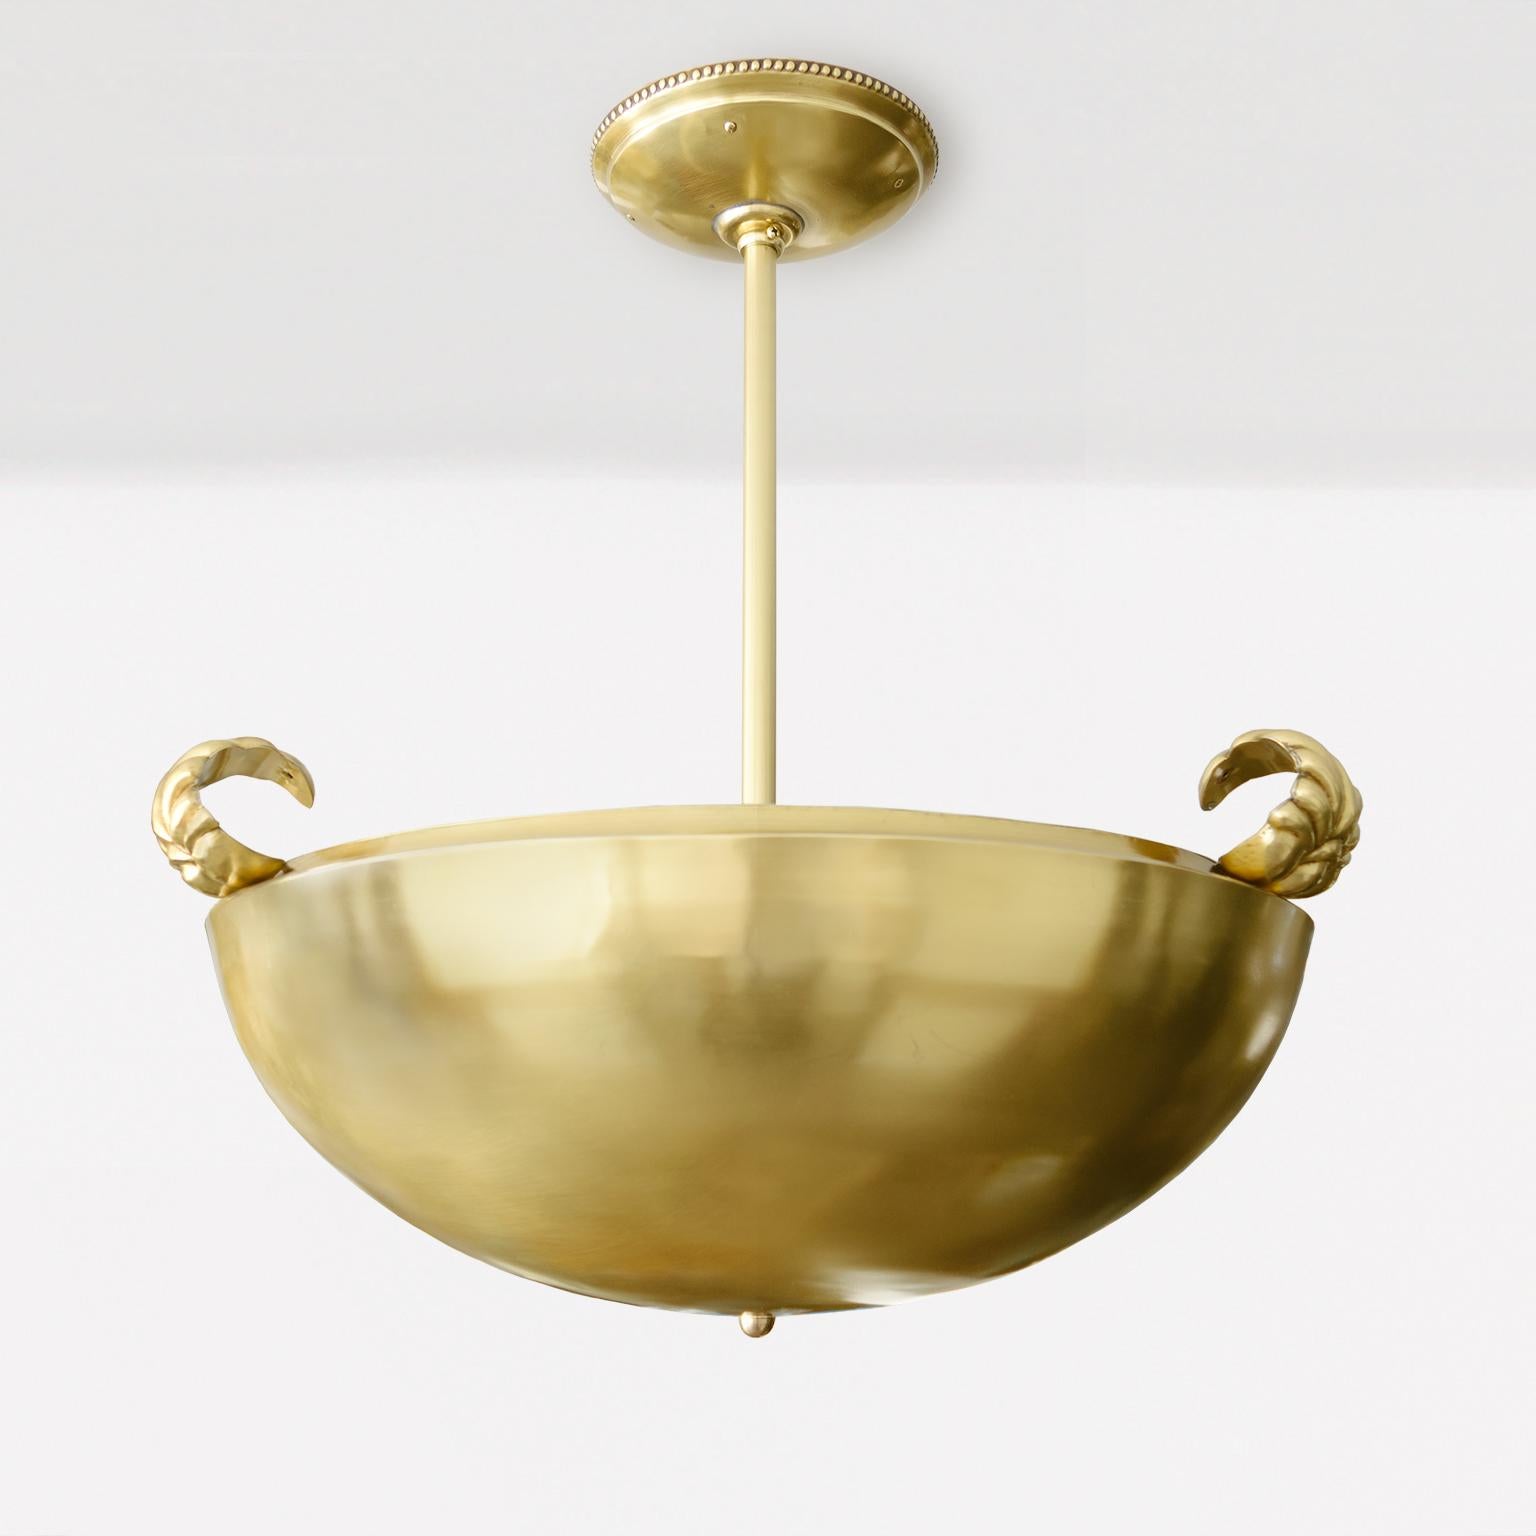 Nordic modernist polished brass pendent by Koru Helsinki, Finland 1925-30. The half sphere shape has a recessed upper rim which upon rest three robustly rendered, curled leaves. Inside the body is the original aluminum liner / reflector, along with